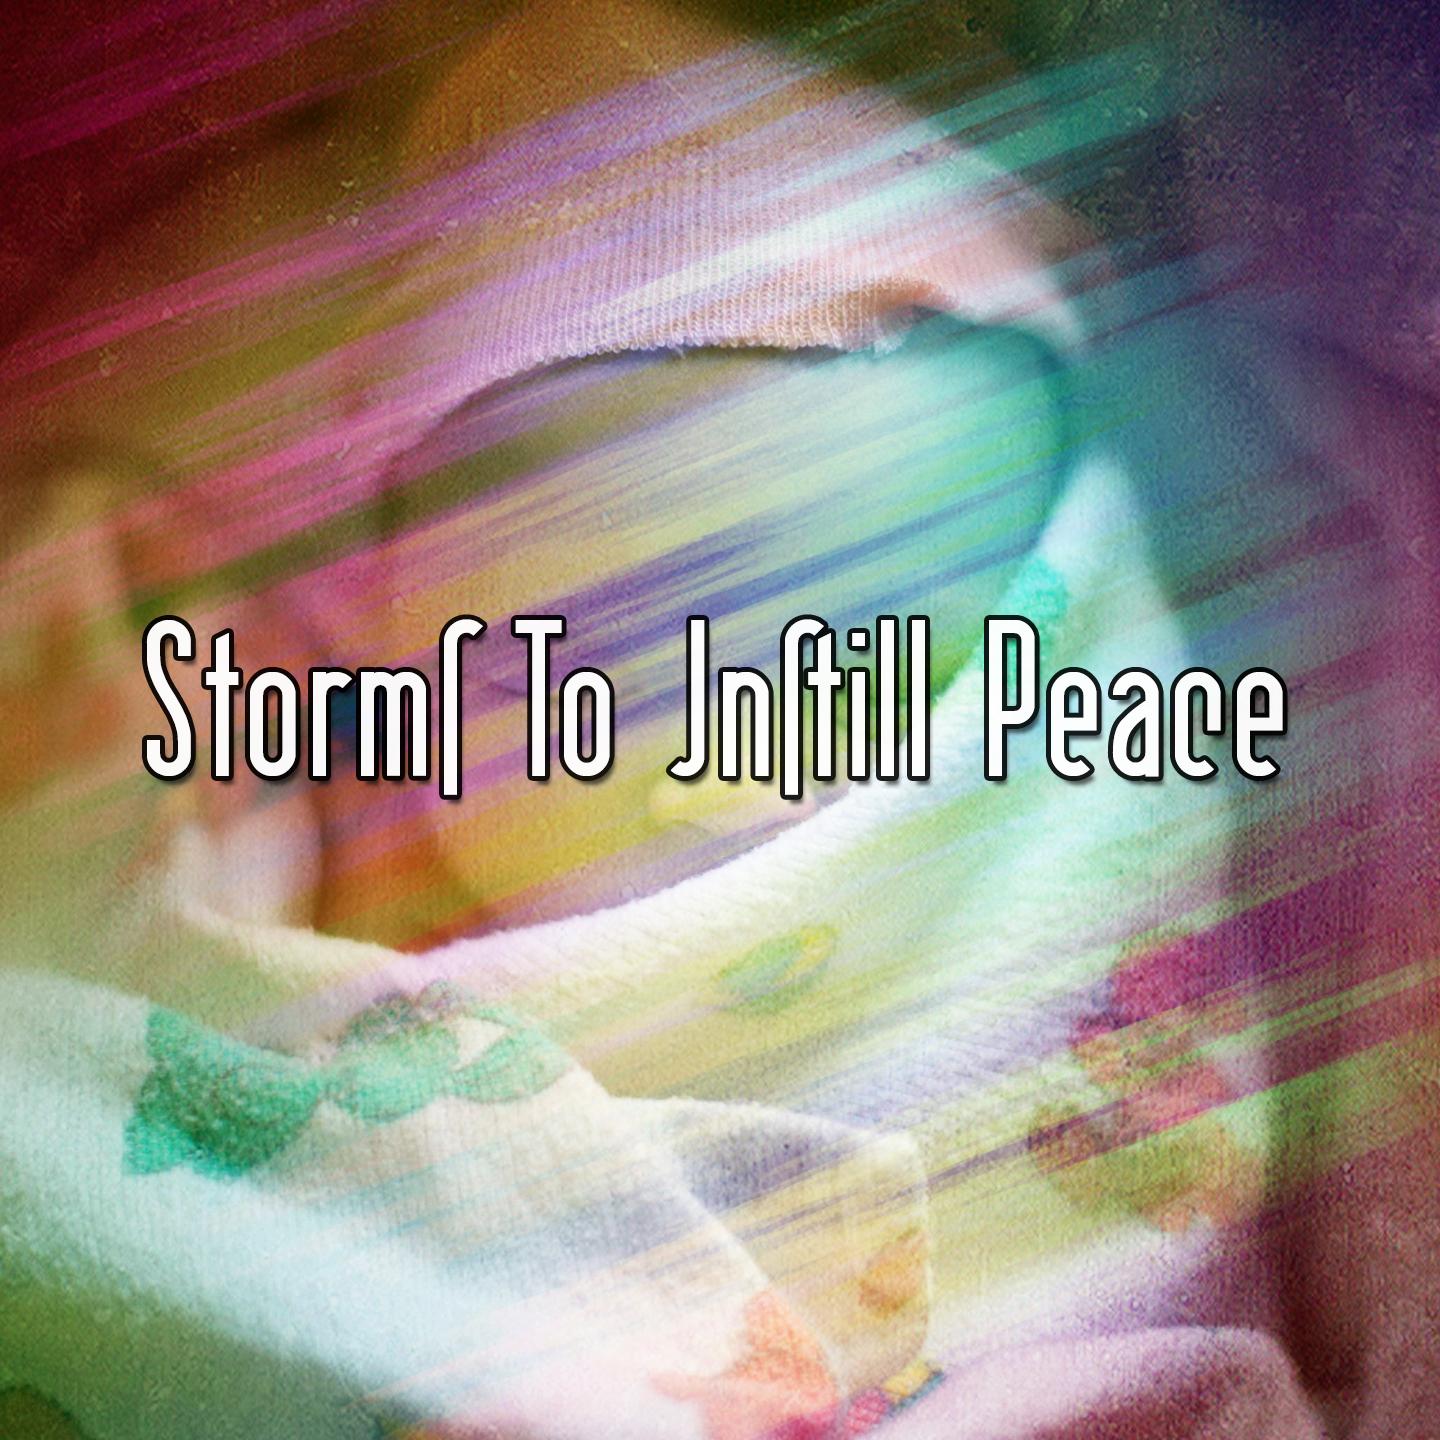 Storms To Instill Peace